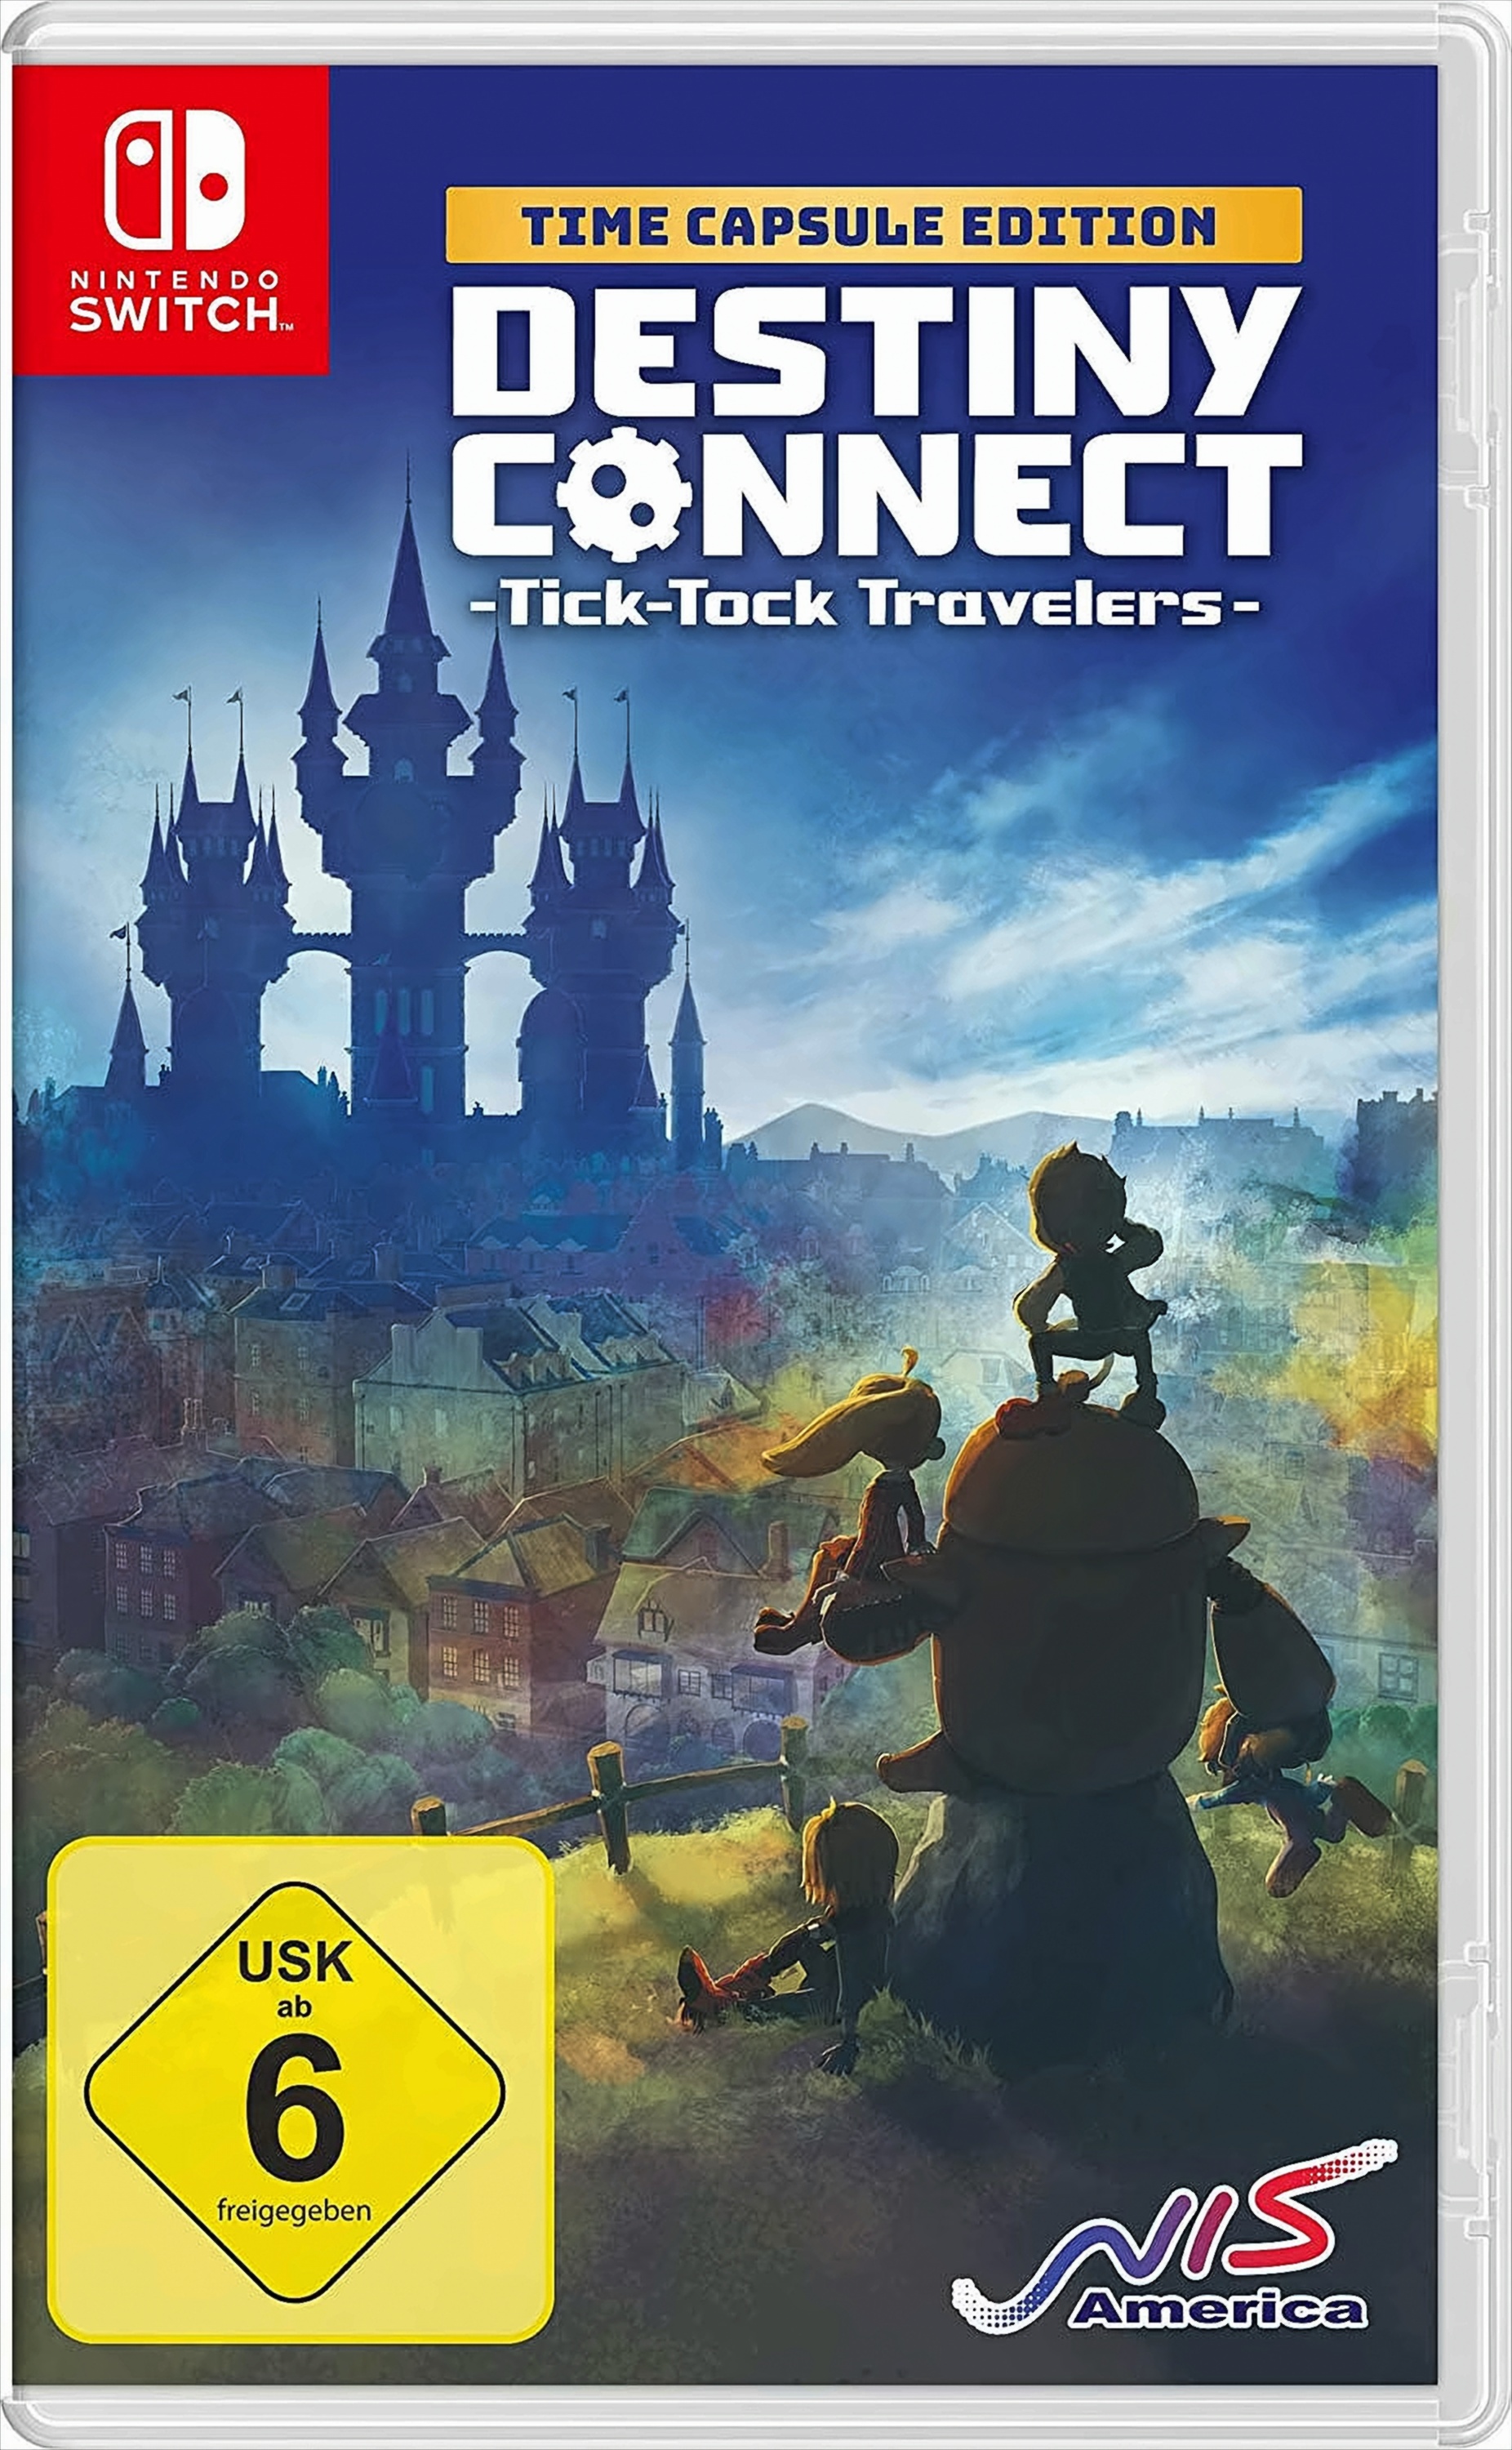 Destiny Connect: Tick-Tock Travelers - Time Capsule Edition (Switch) von NIS America